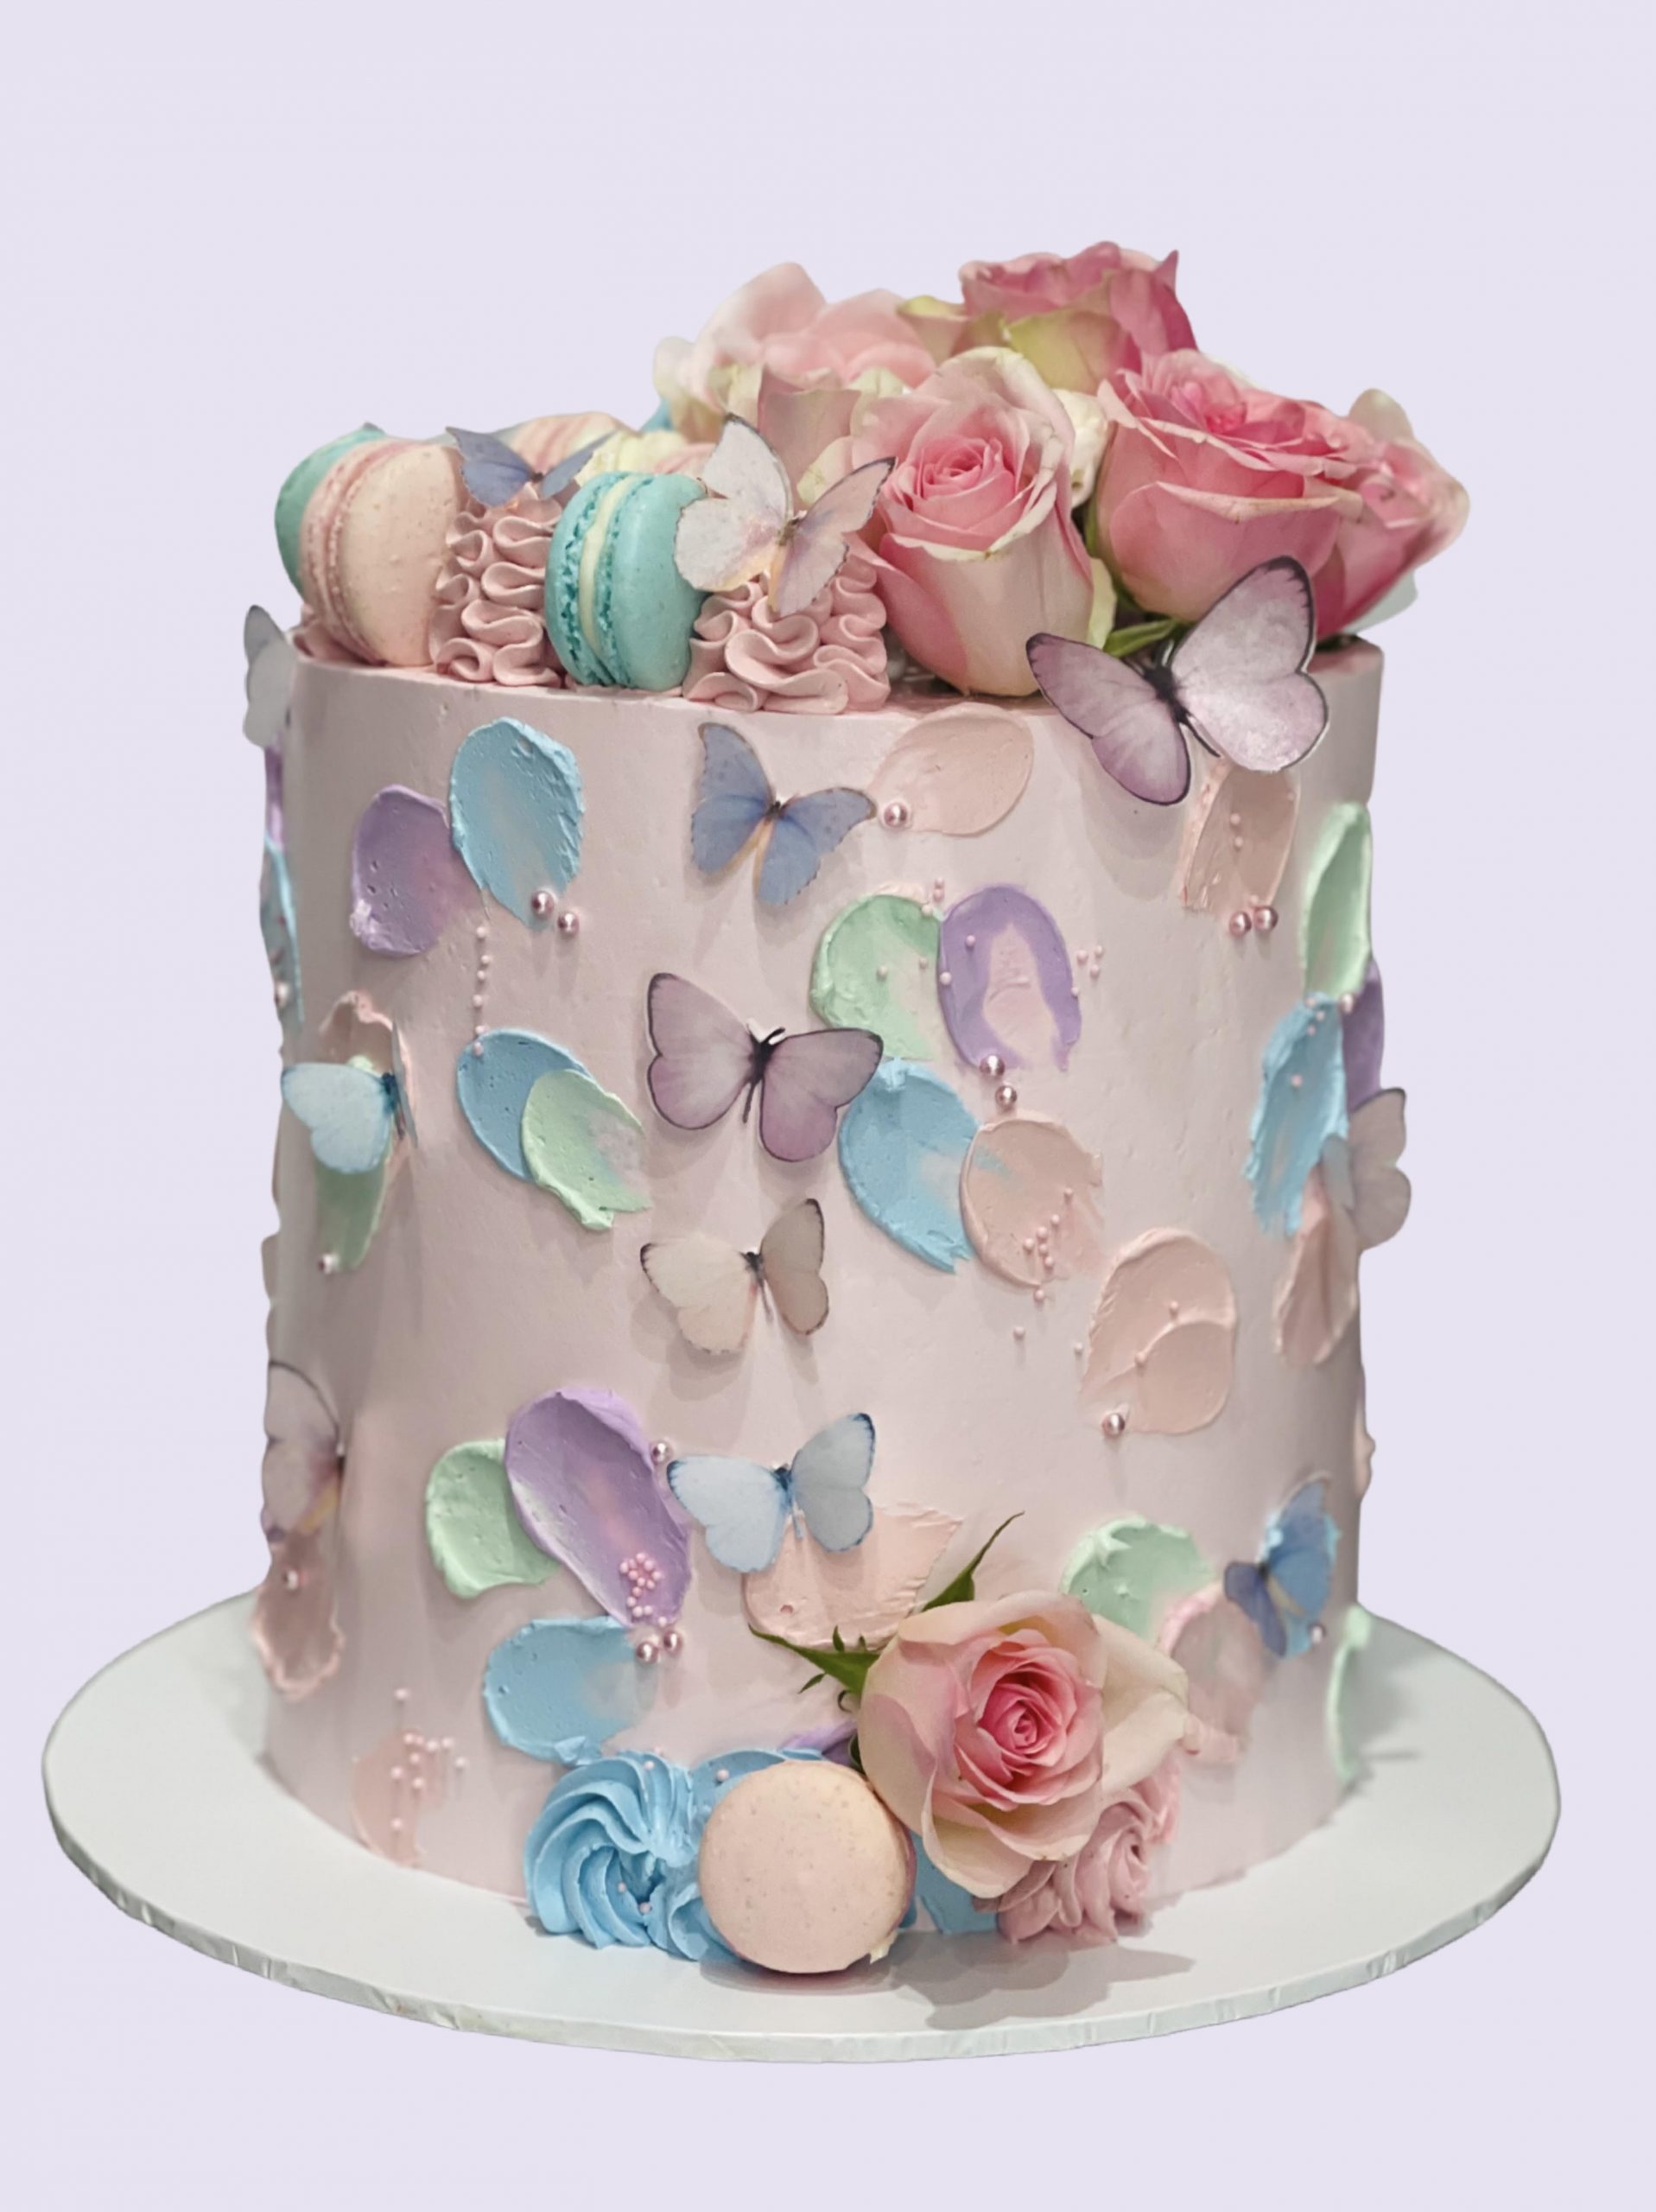 Pastel Party Cake - What Should I Make For...